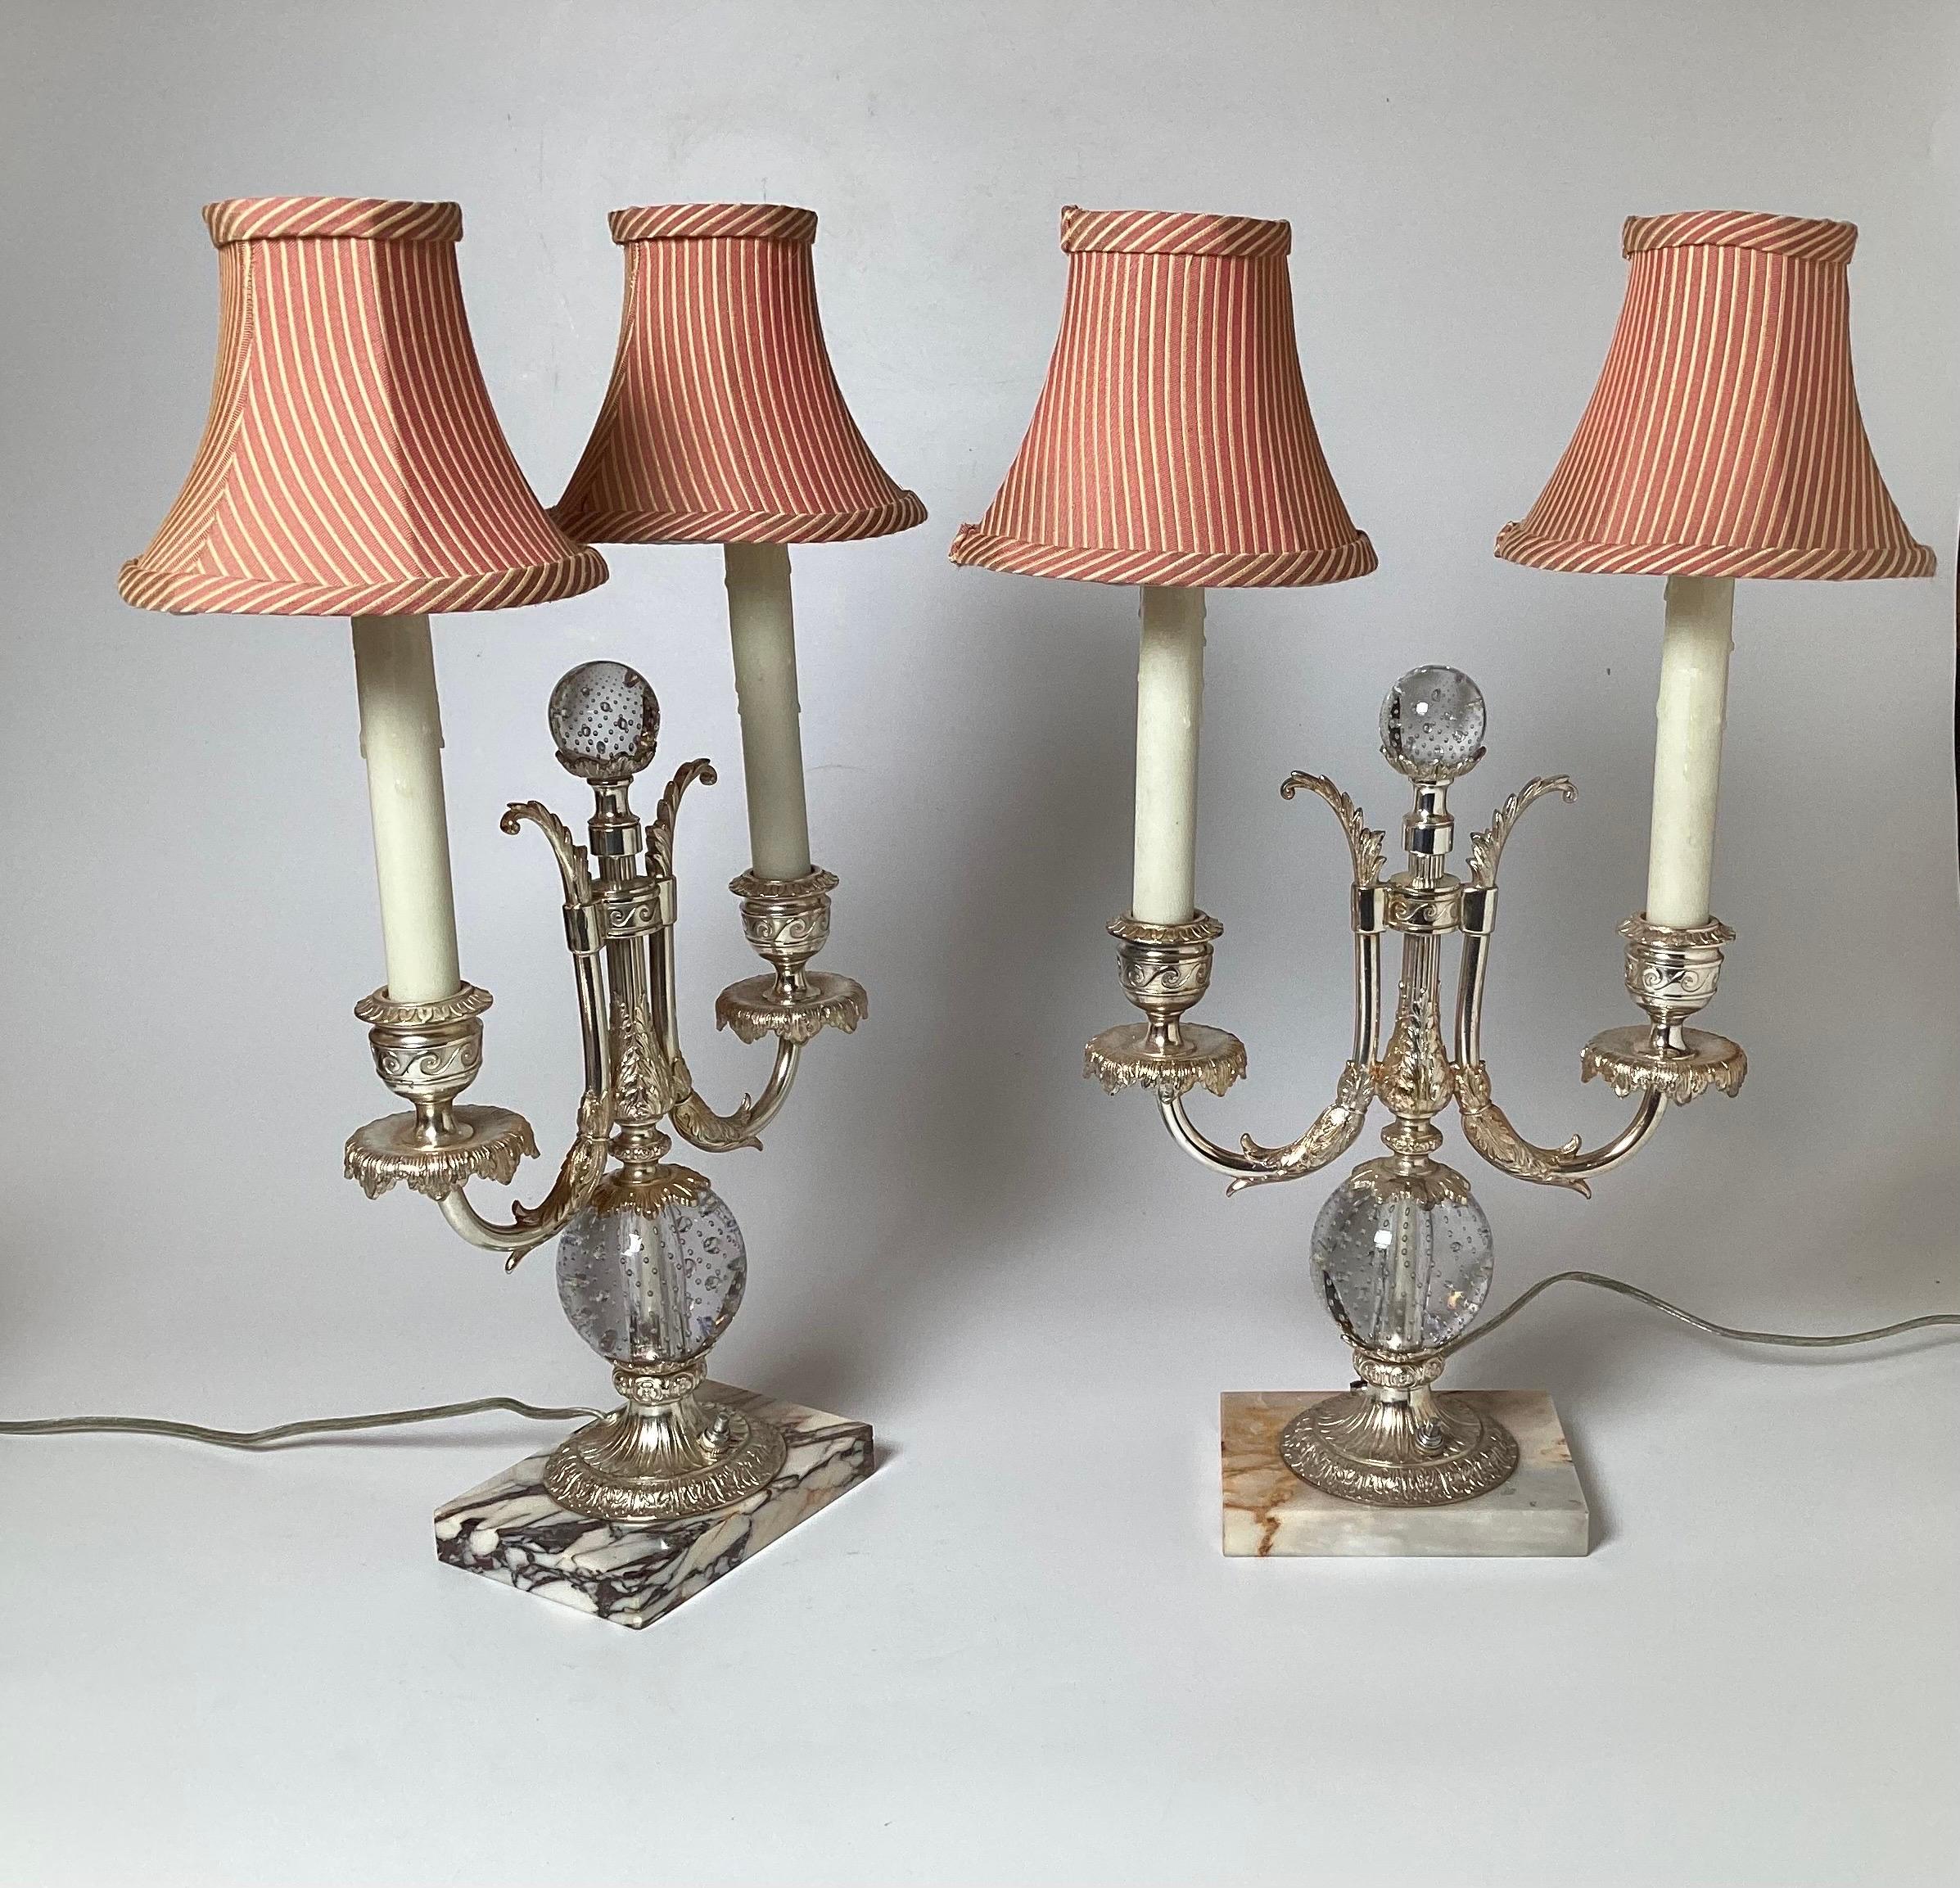 An elegant pair of silvered bronze and glass candelabra lamps by Pairpoint . The two light lamps with silvered bronze mounts with glass sphere at the center and top with control bubbles in the glass. The base is a white and grey marble. Recent